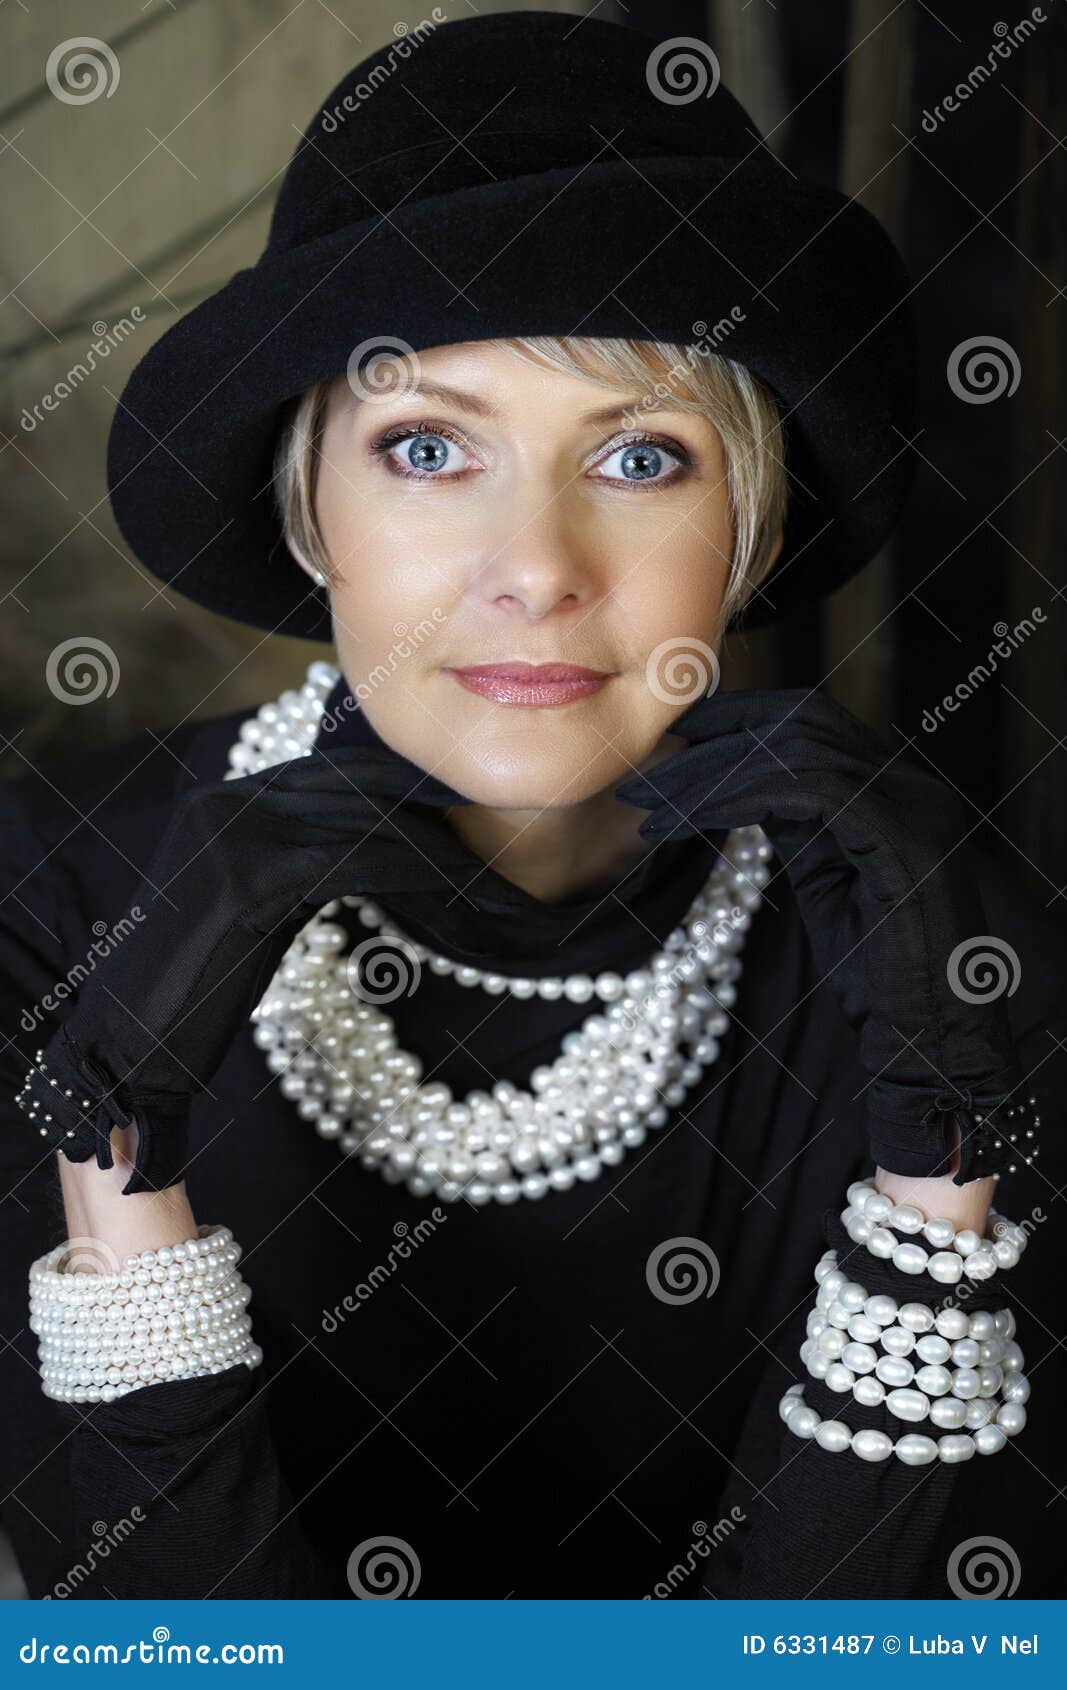 woman in pearls in her 40s